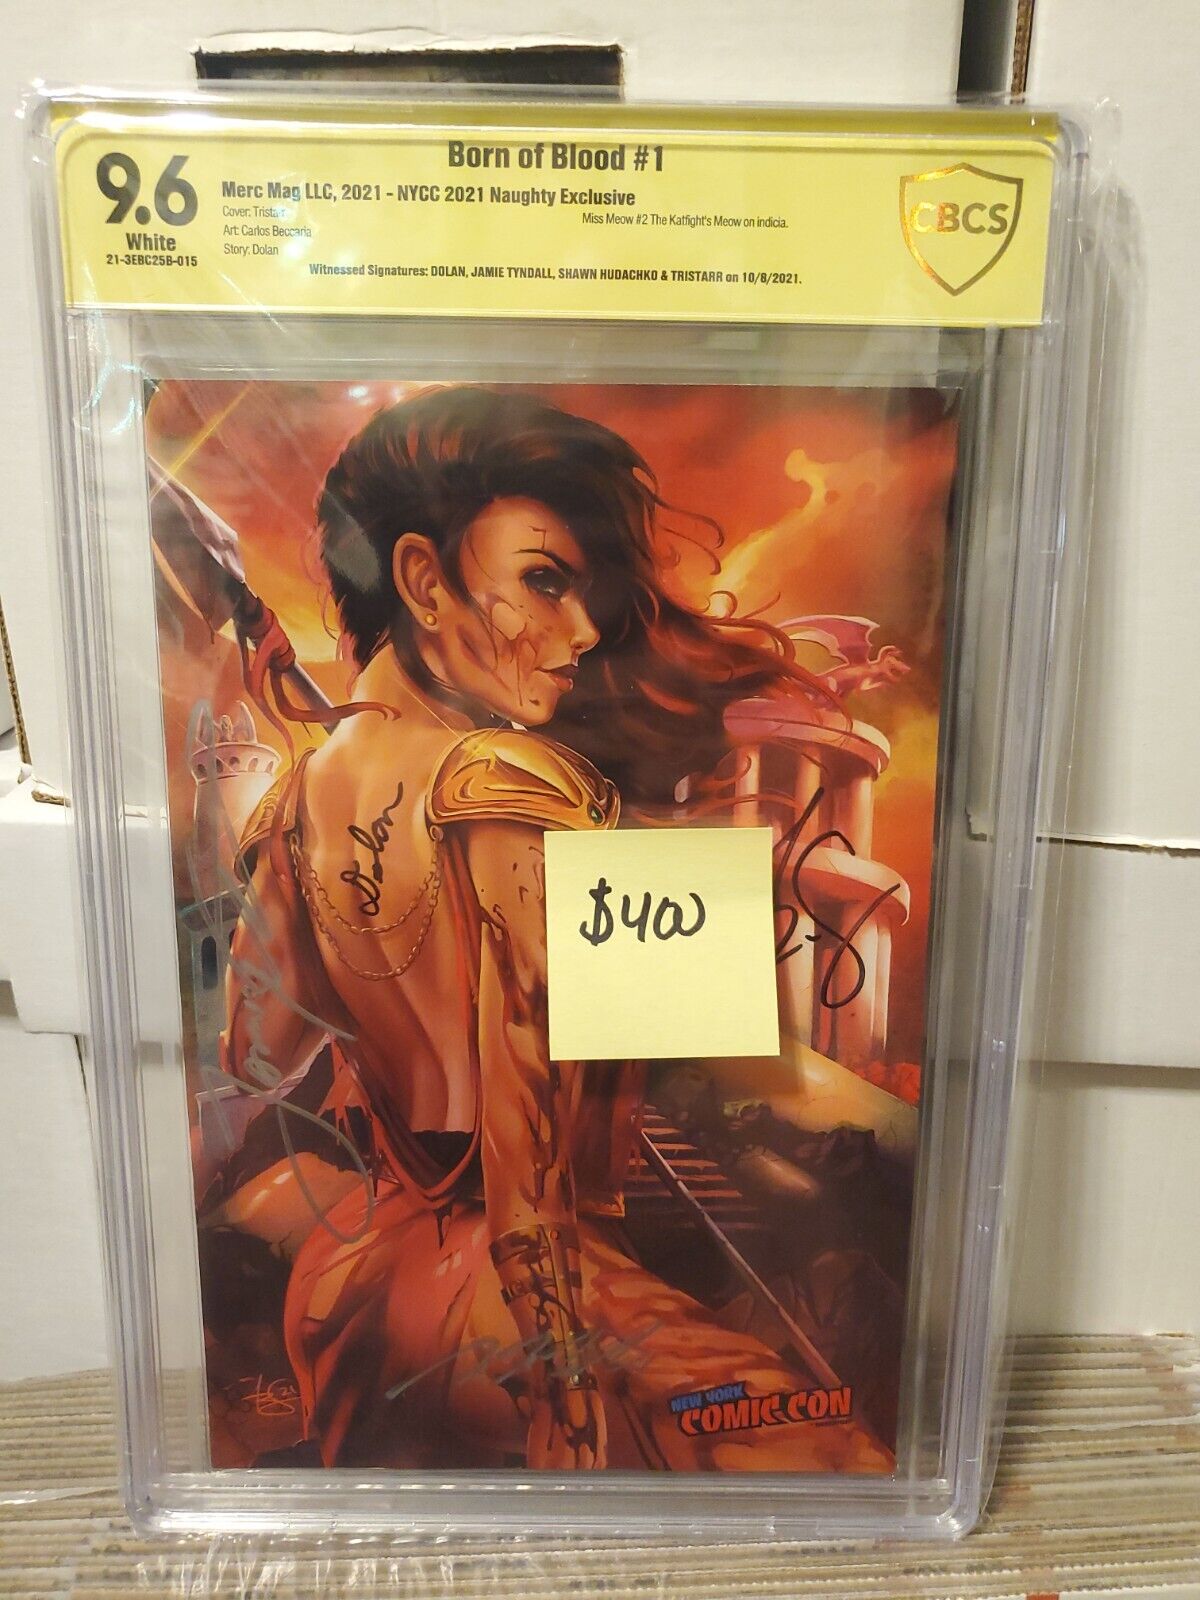 Born Of Blood #1 Nycc 2021 Naughty Exclusive Cbcs 9.6 4x Signed Dolan, Tyndall,